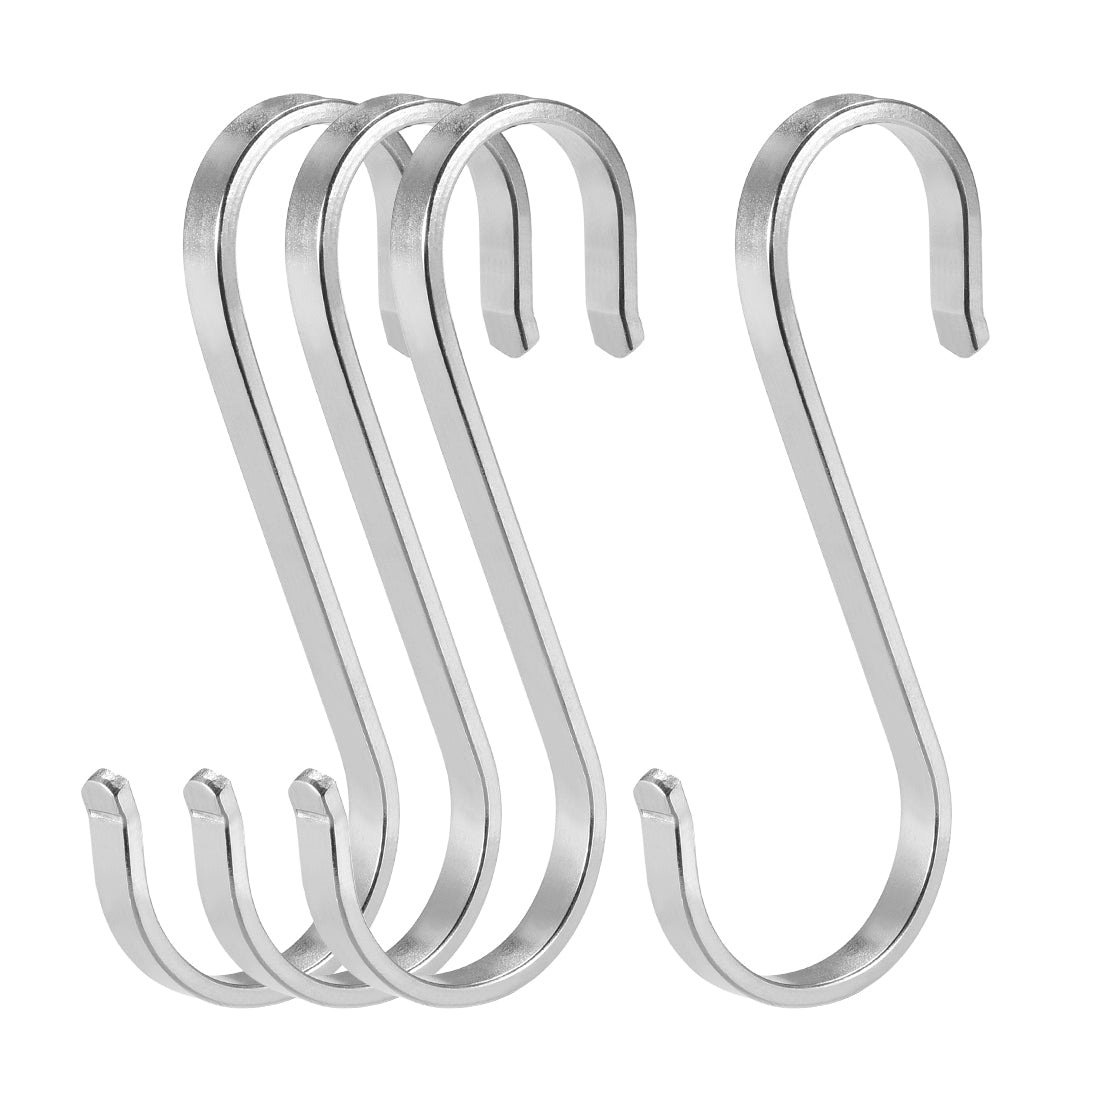 uxcell Uxcell Stainless Steel S Hooks 3.15" S Shaped Hook Hangers 4pcs